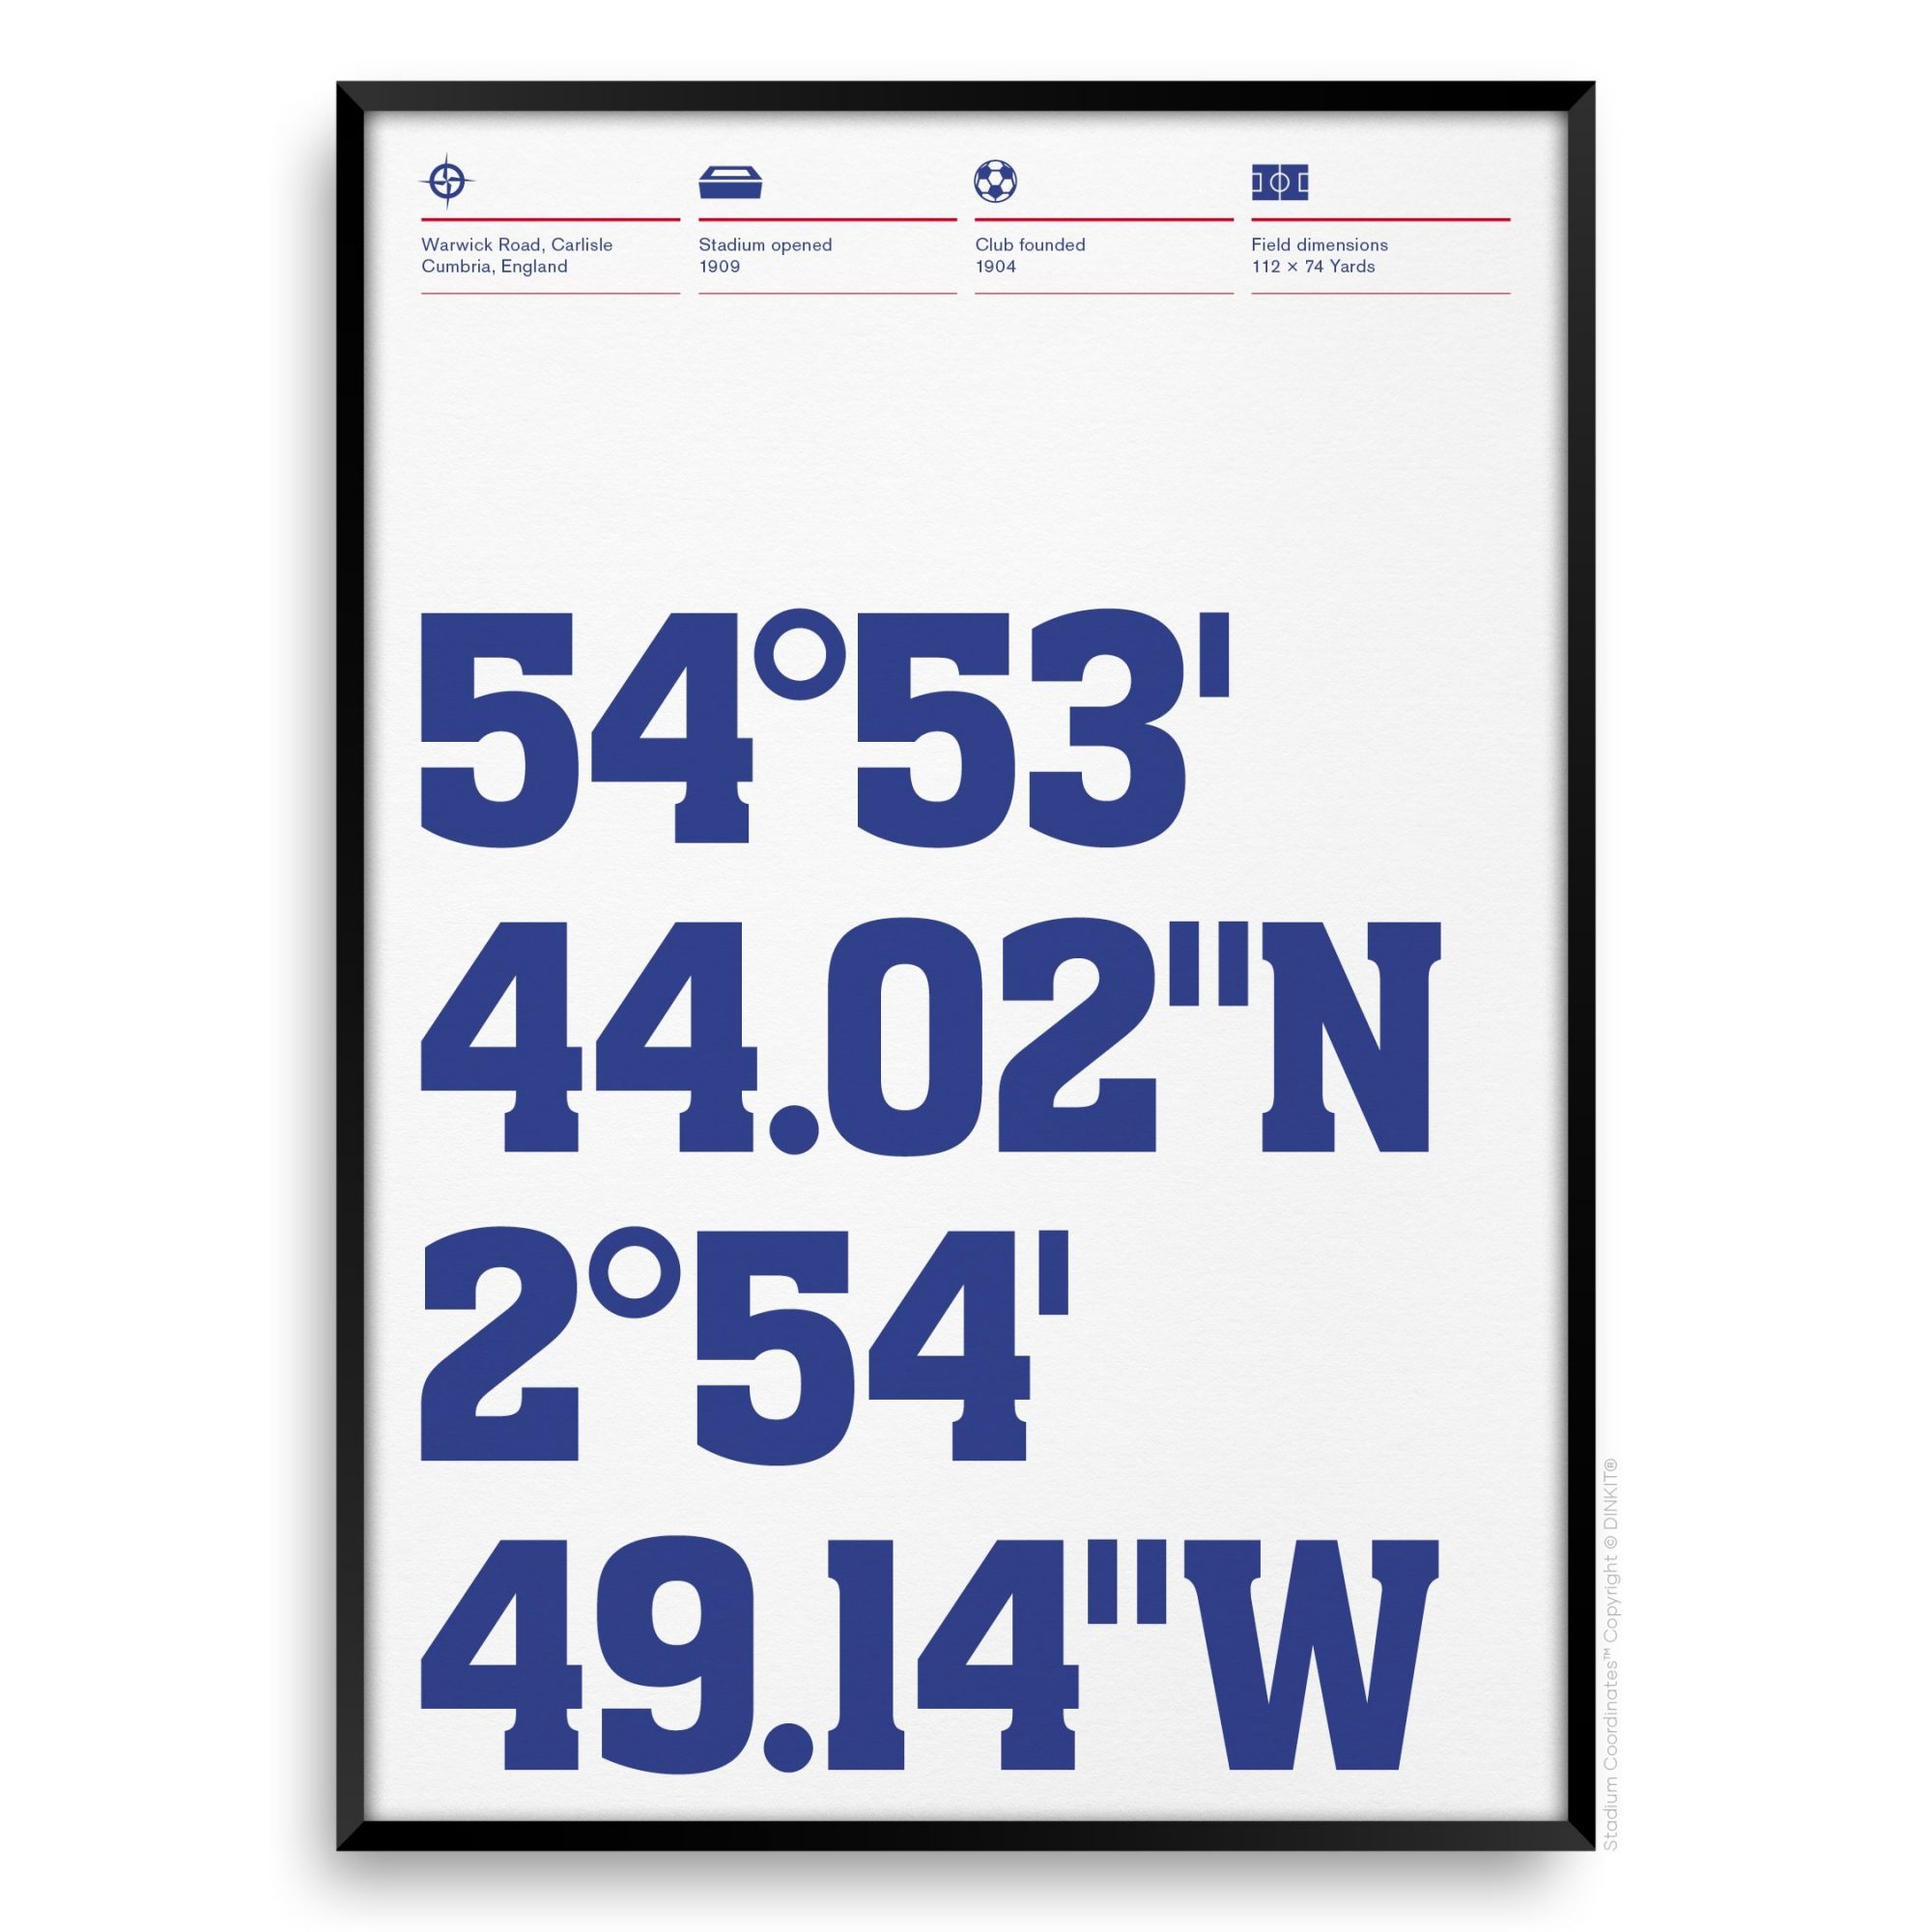 Carlisle United Gifts, Football Posters, Gift Ideas